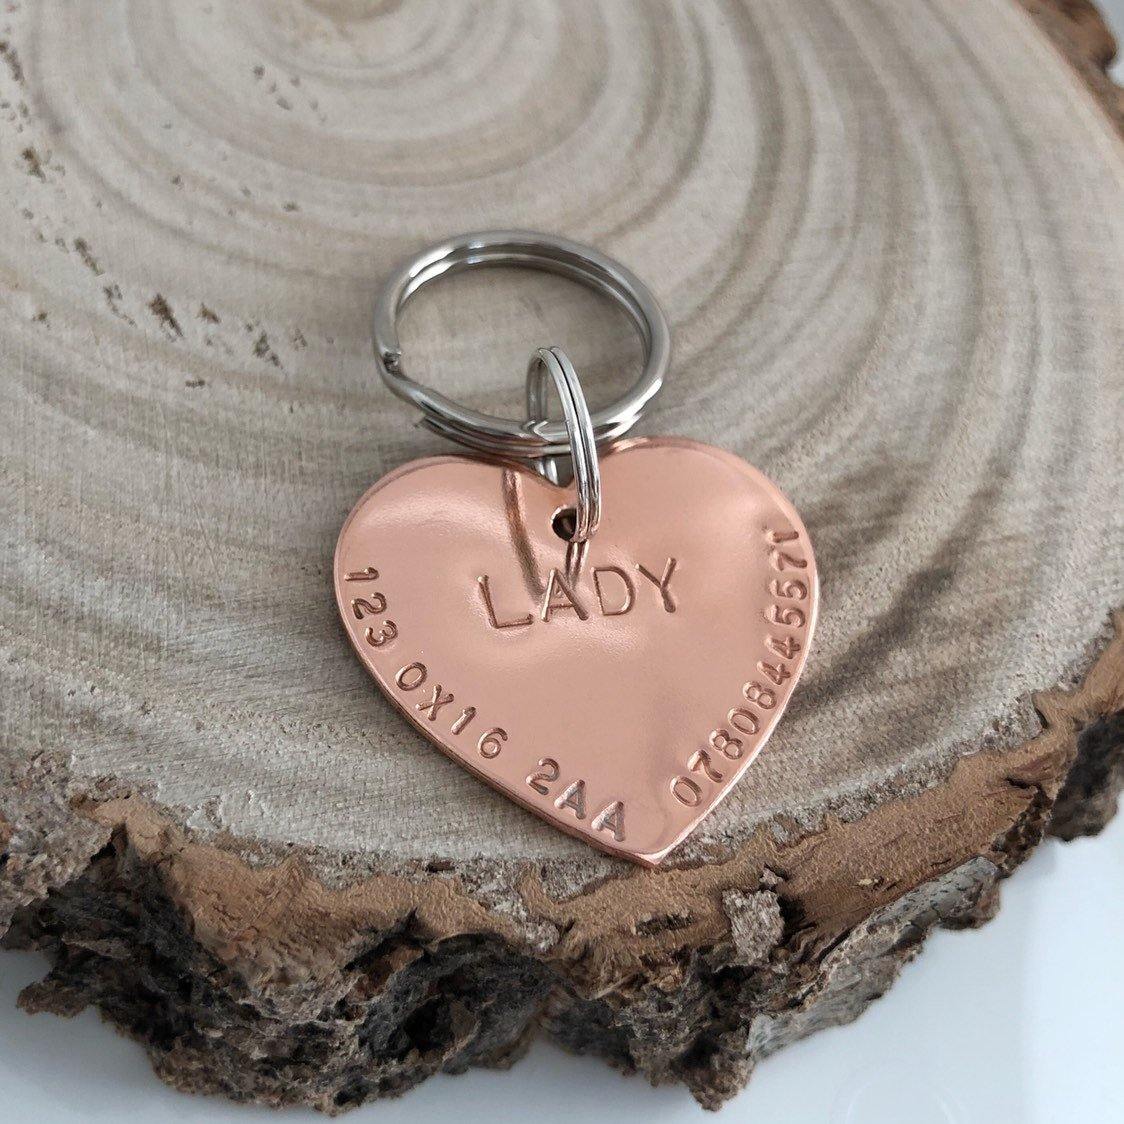 Copper Heart Dog ID Tag - The Little Stamping Co.